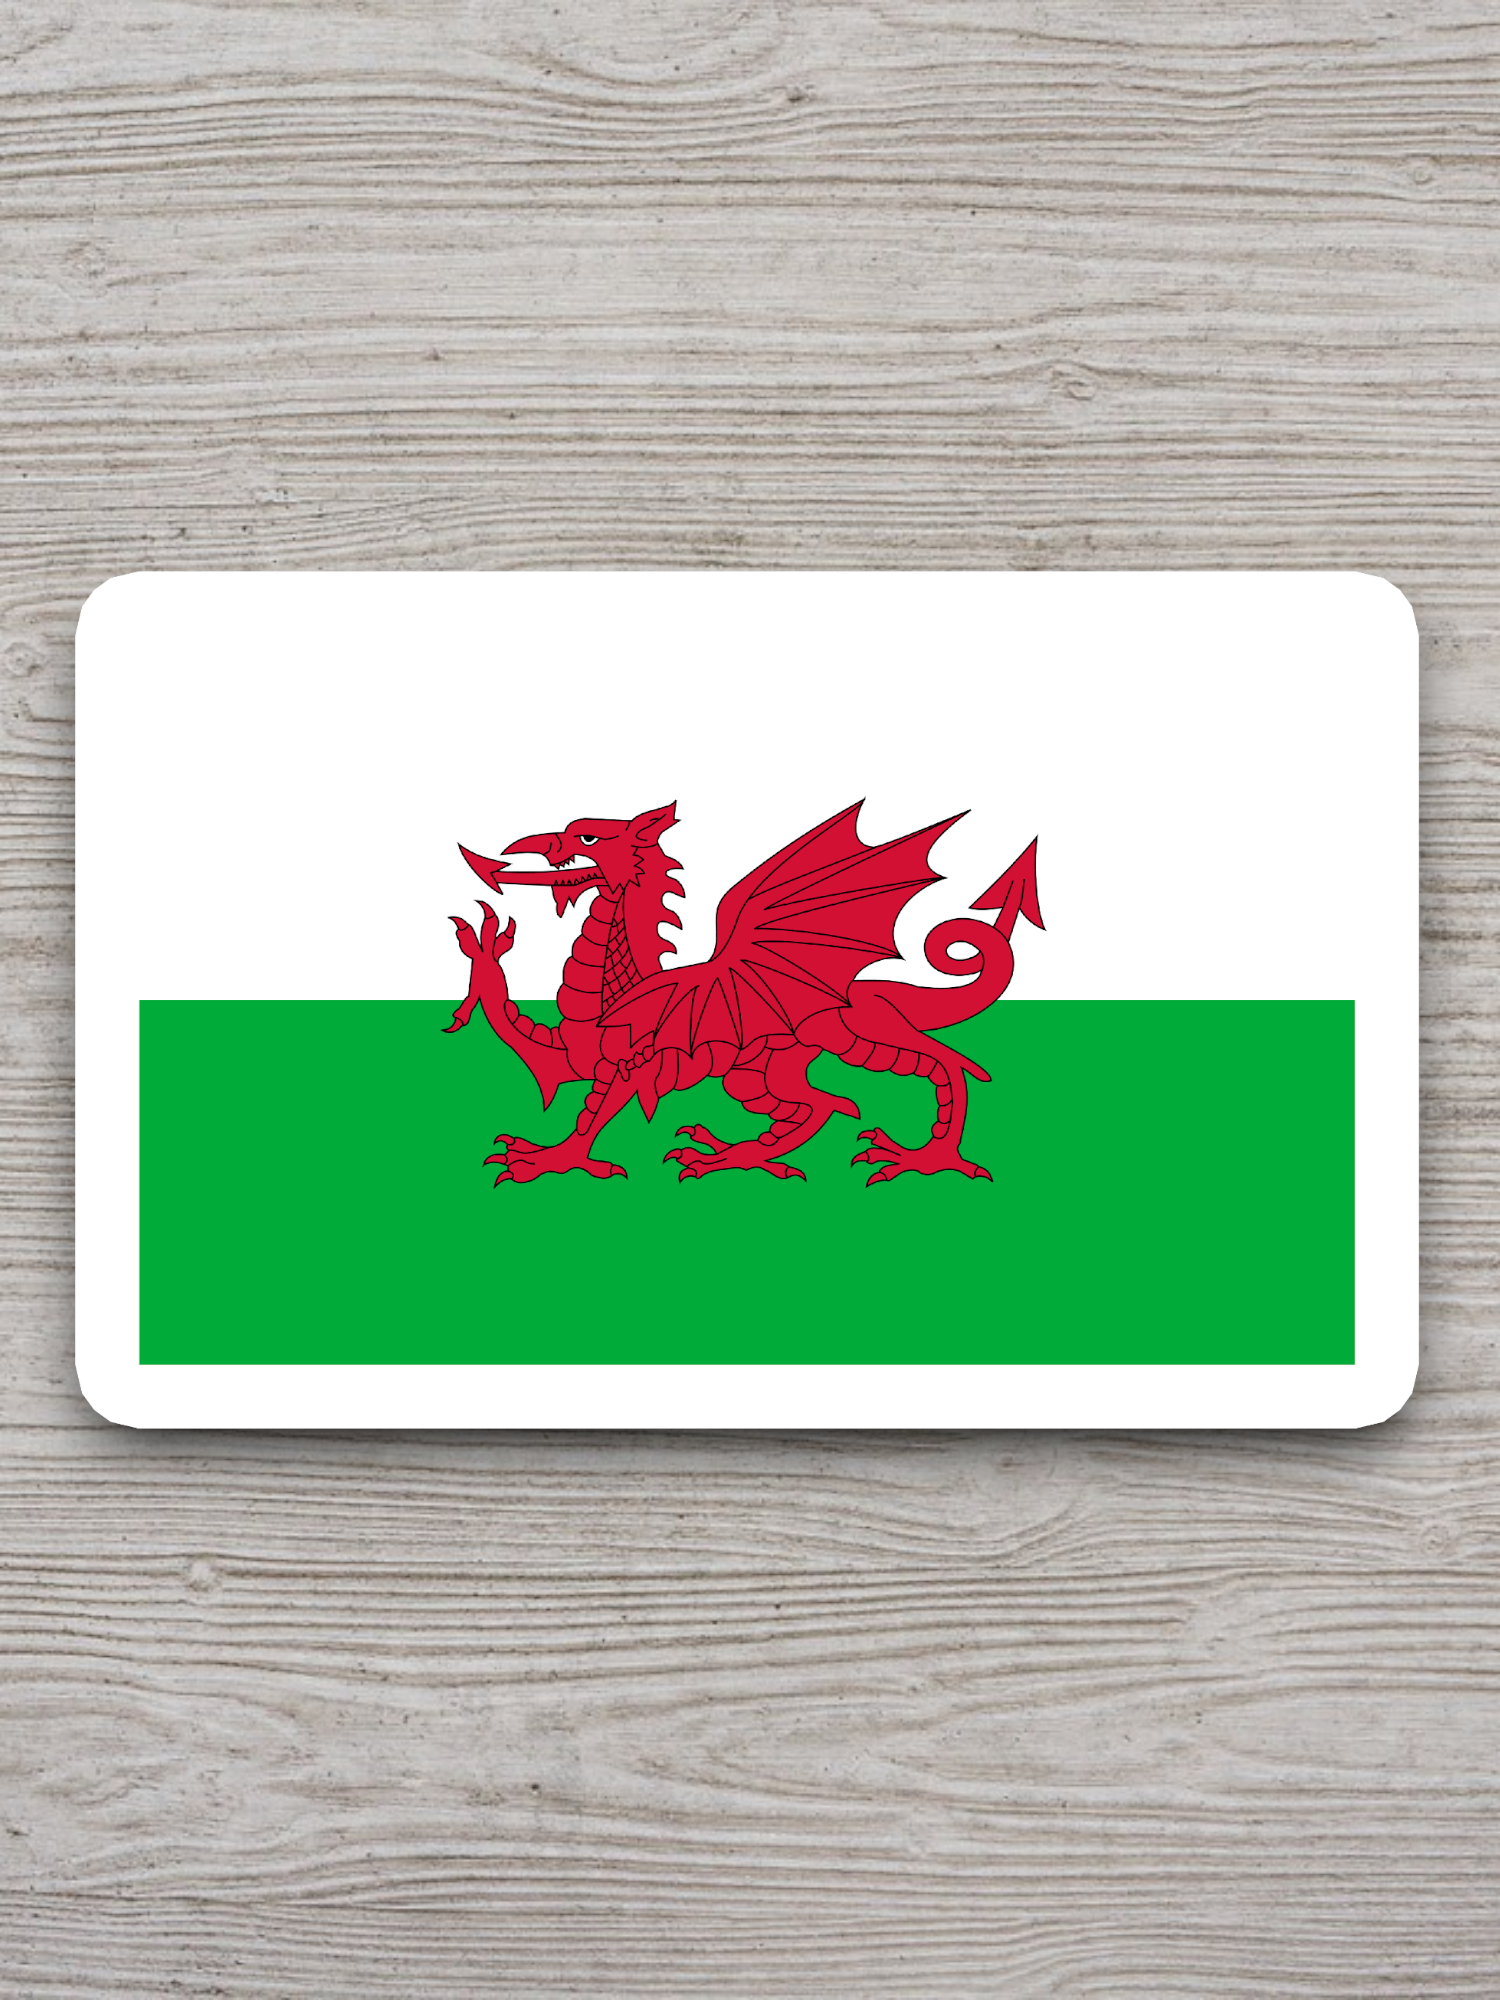 Wales Flag - International Country Flag Sticker